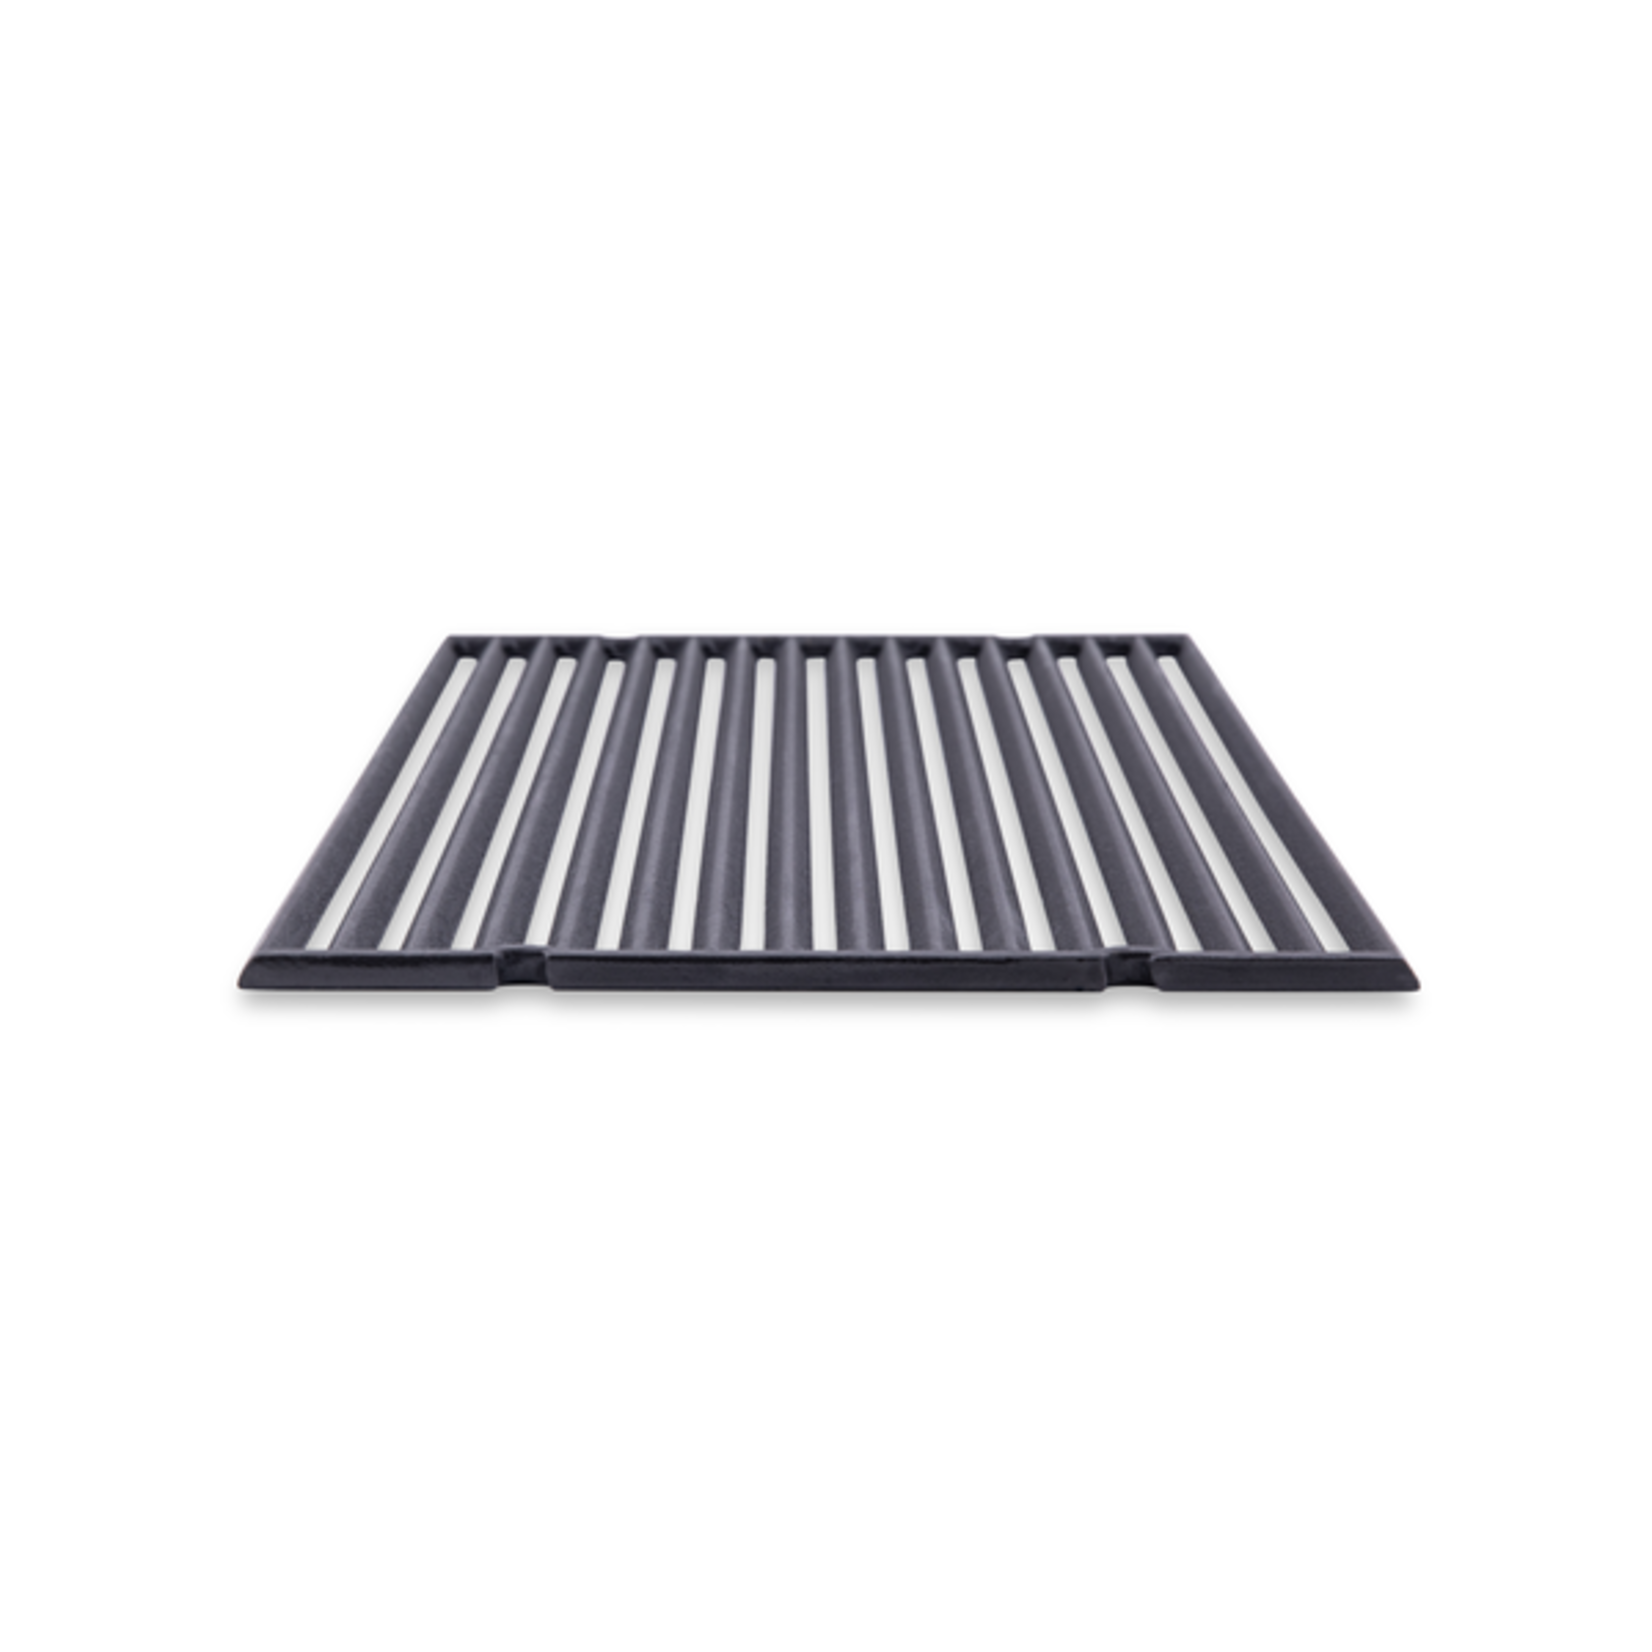 Broil King Cooking Grid - Signet/Crown - Cast Iron - 2 Pieces